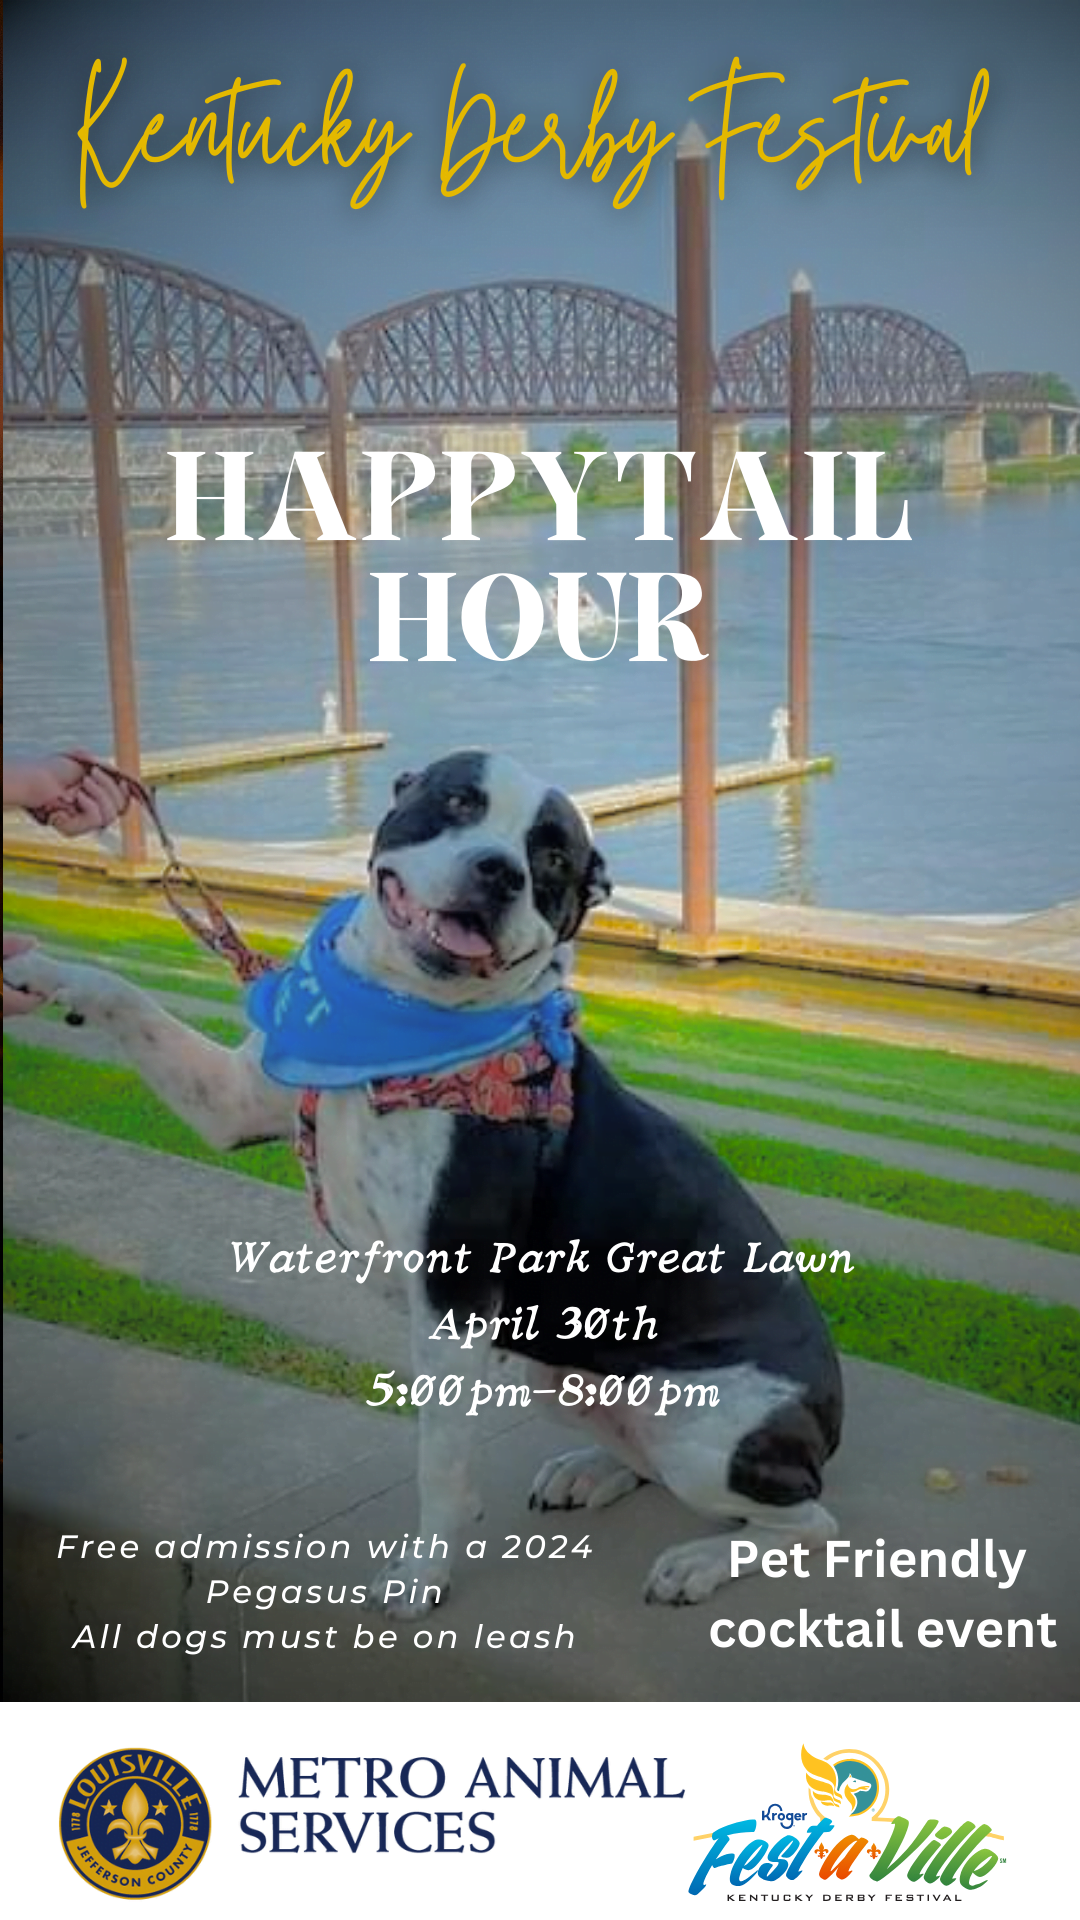 Happy Tail Hour